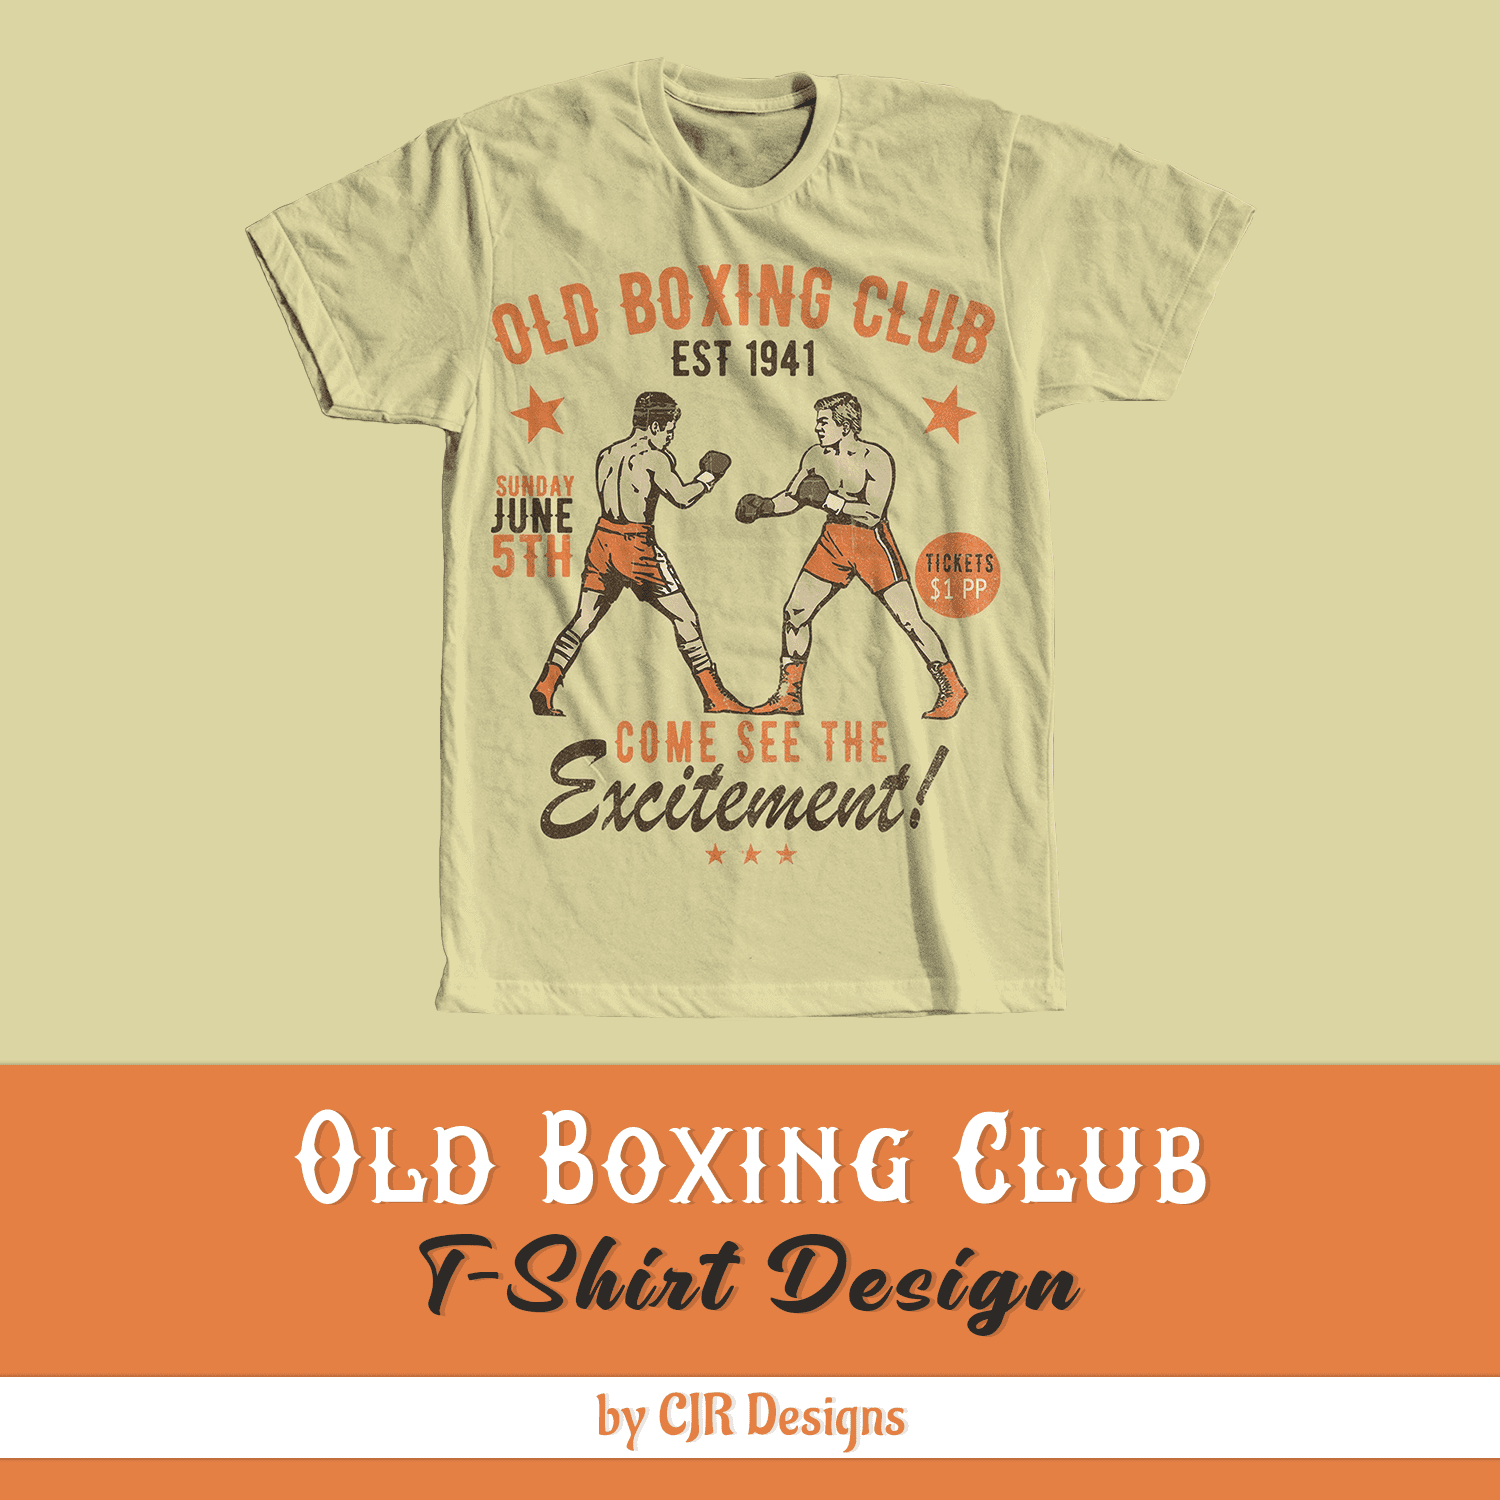 Old Boxing Club T-Shirt Design cover.